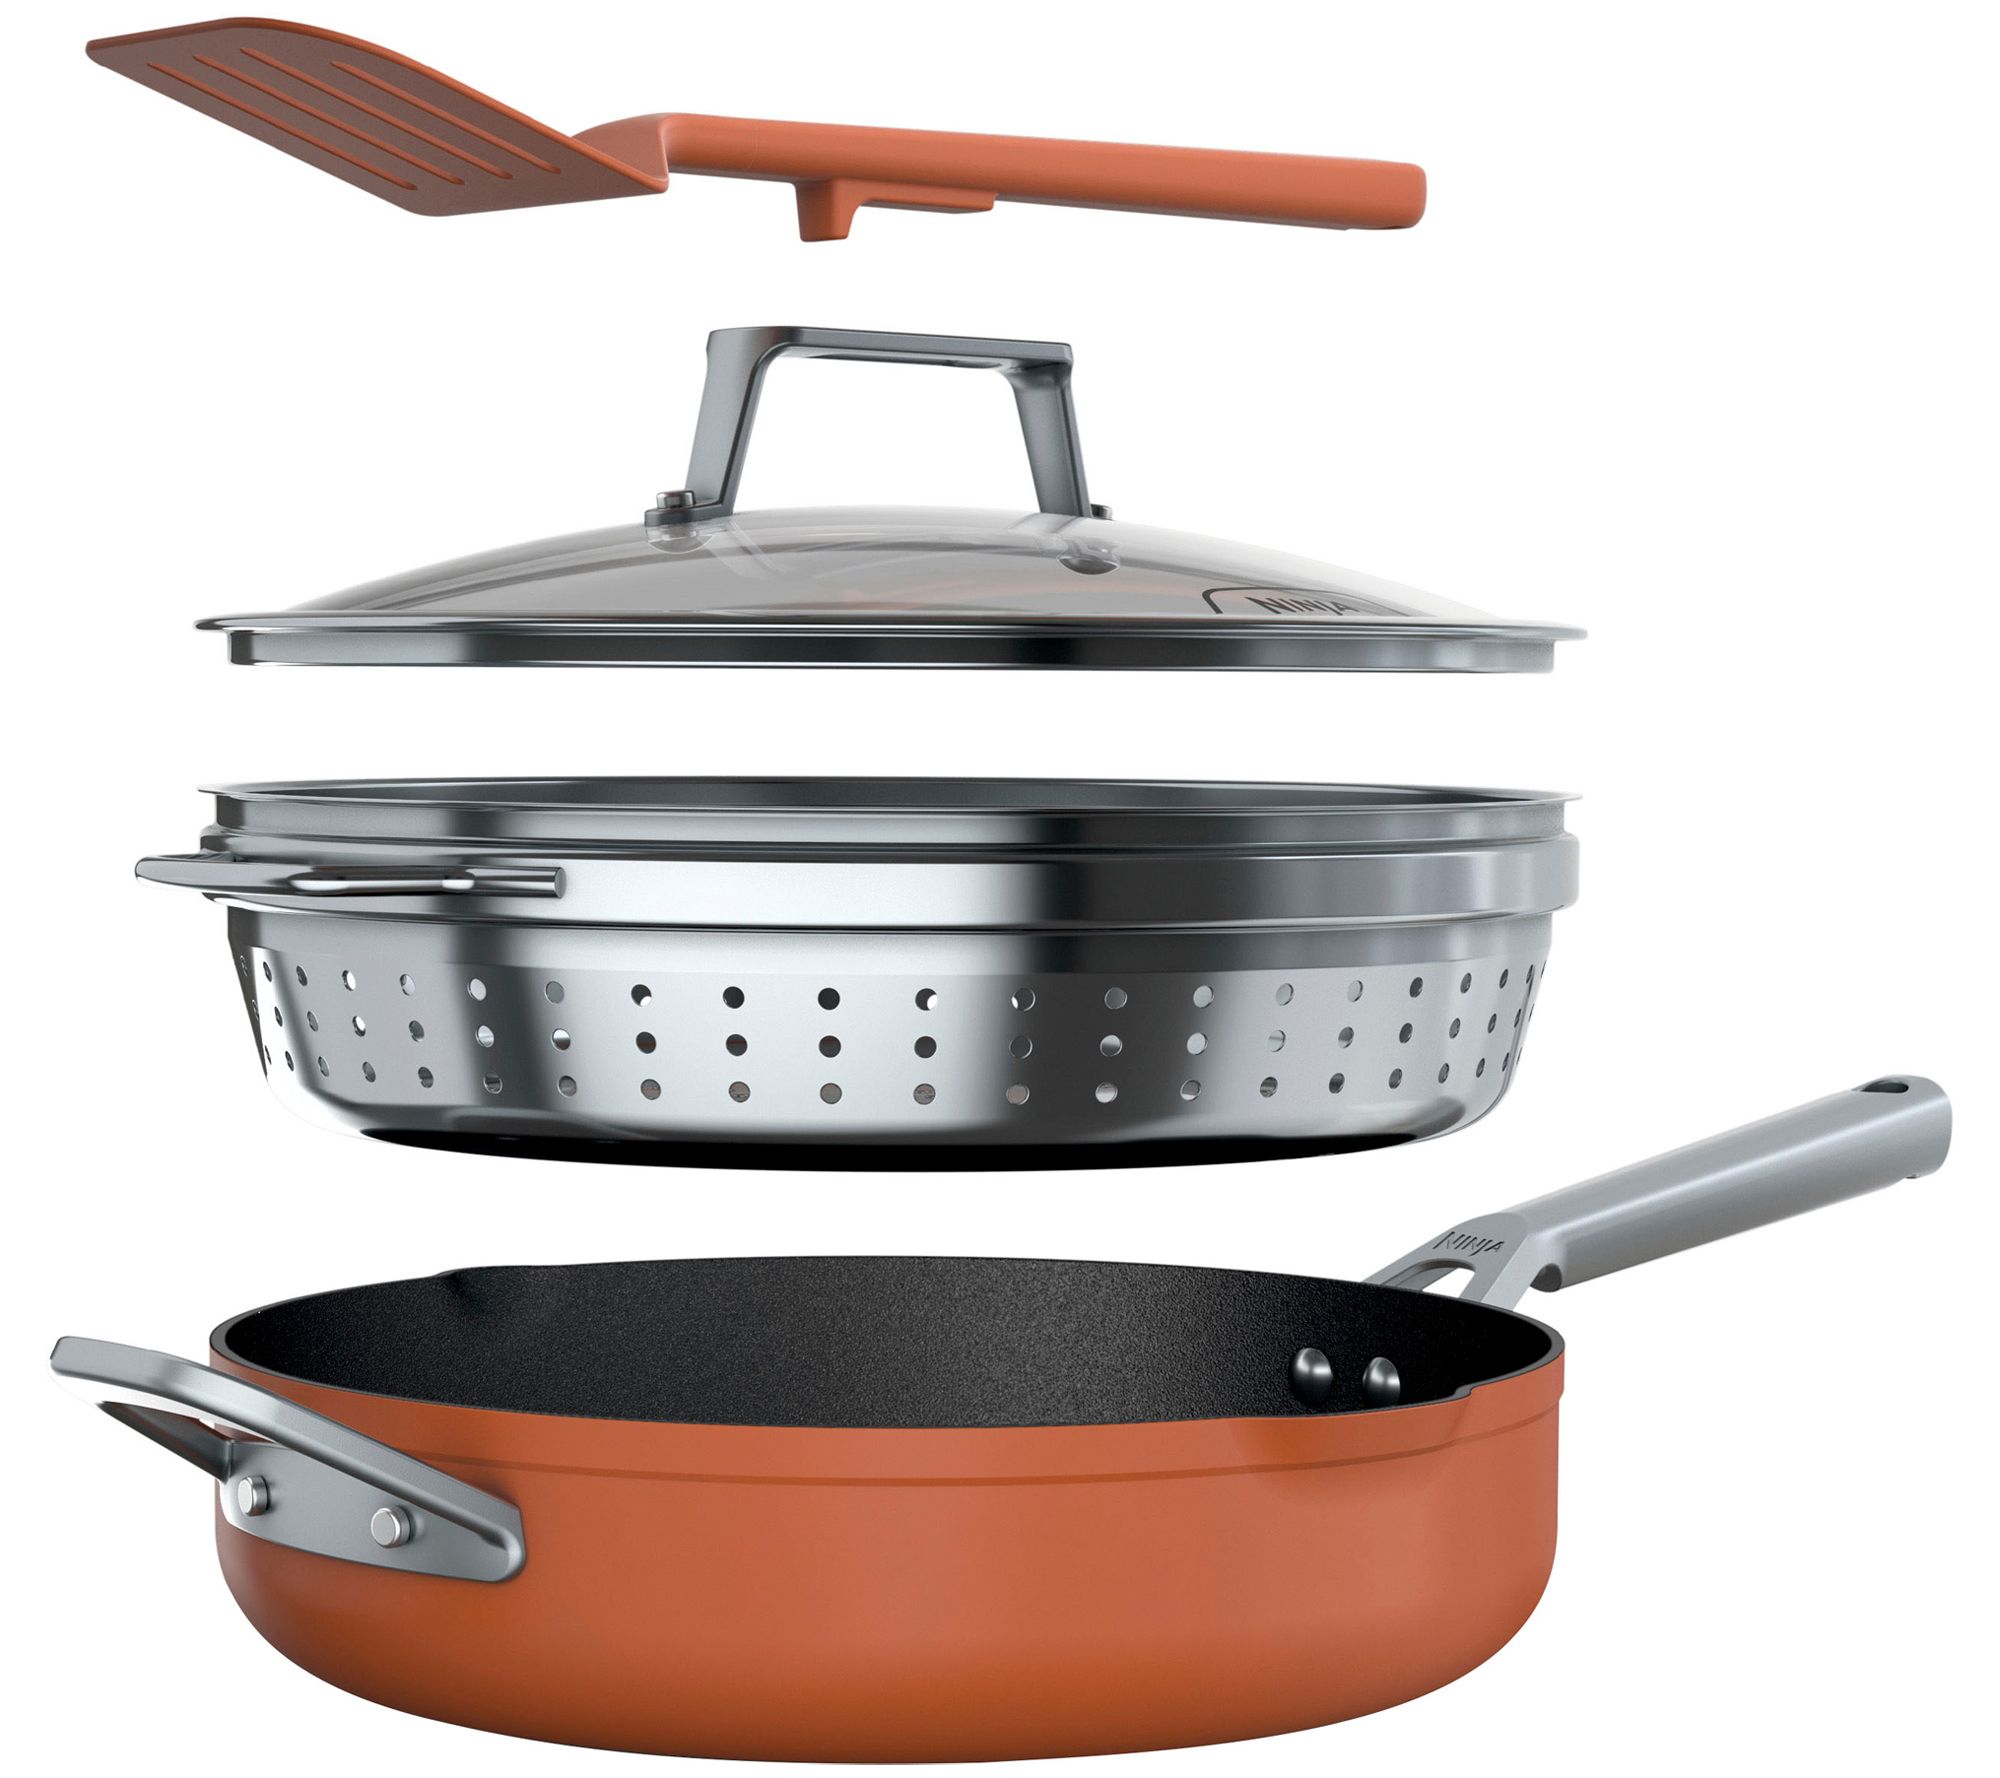 Meyer Cookware : Buy Meyer Accent Series Hard Anodized Nonstick & Stainless  Steel Pots and Pans / Essential Set of 6 Online